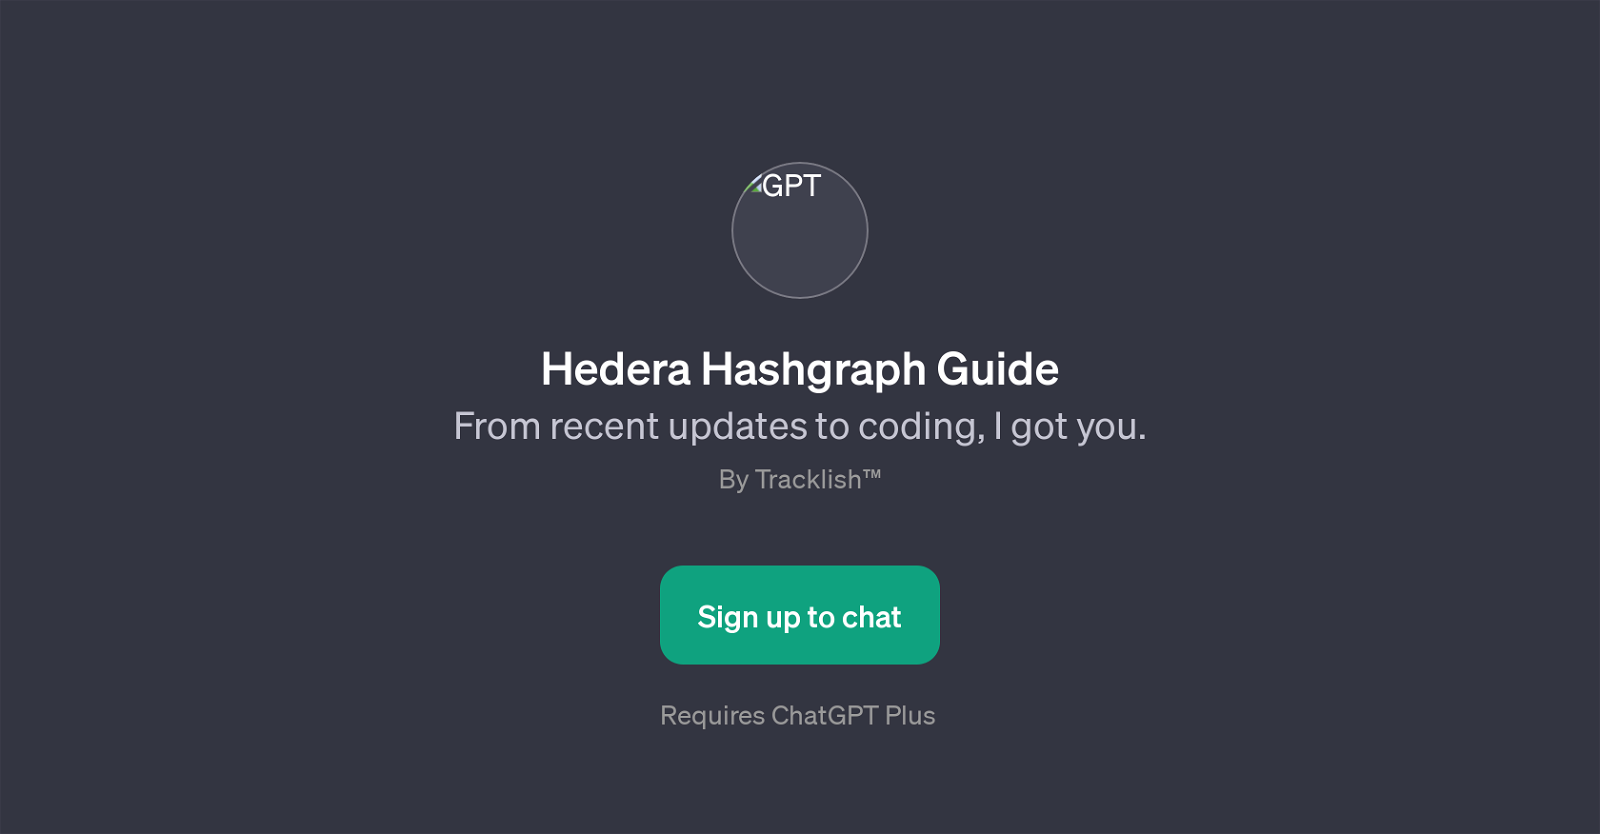 Hedera Hashgraph Guide website